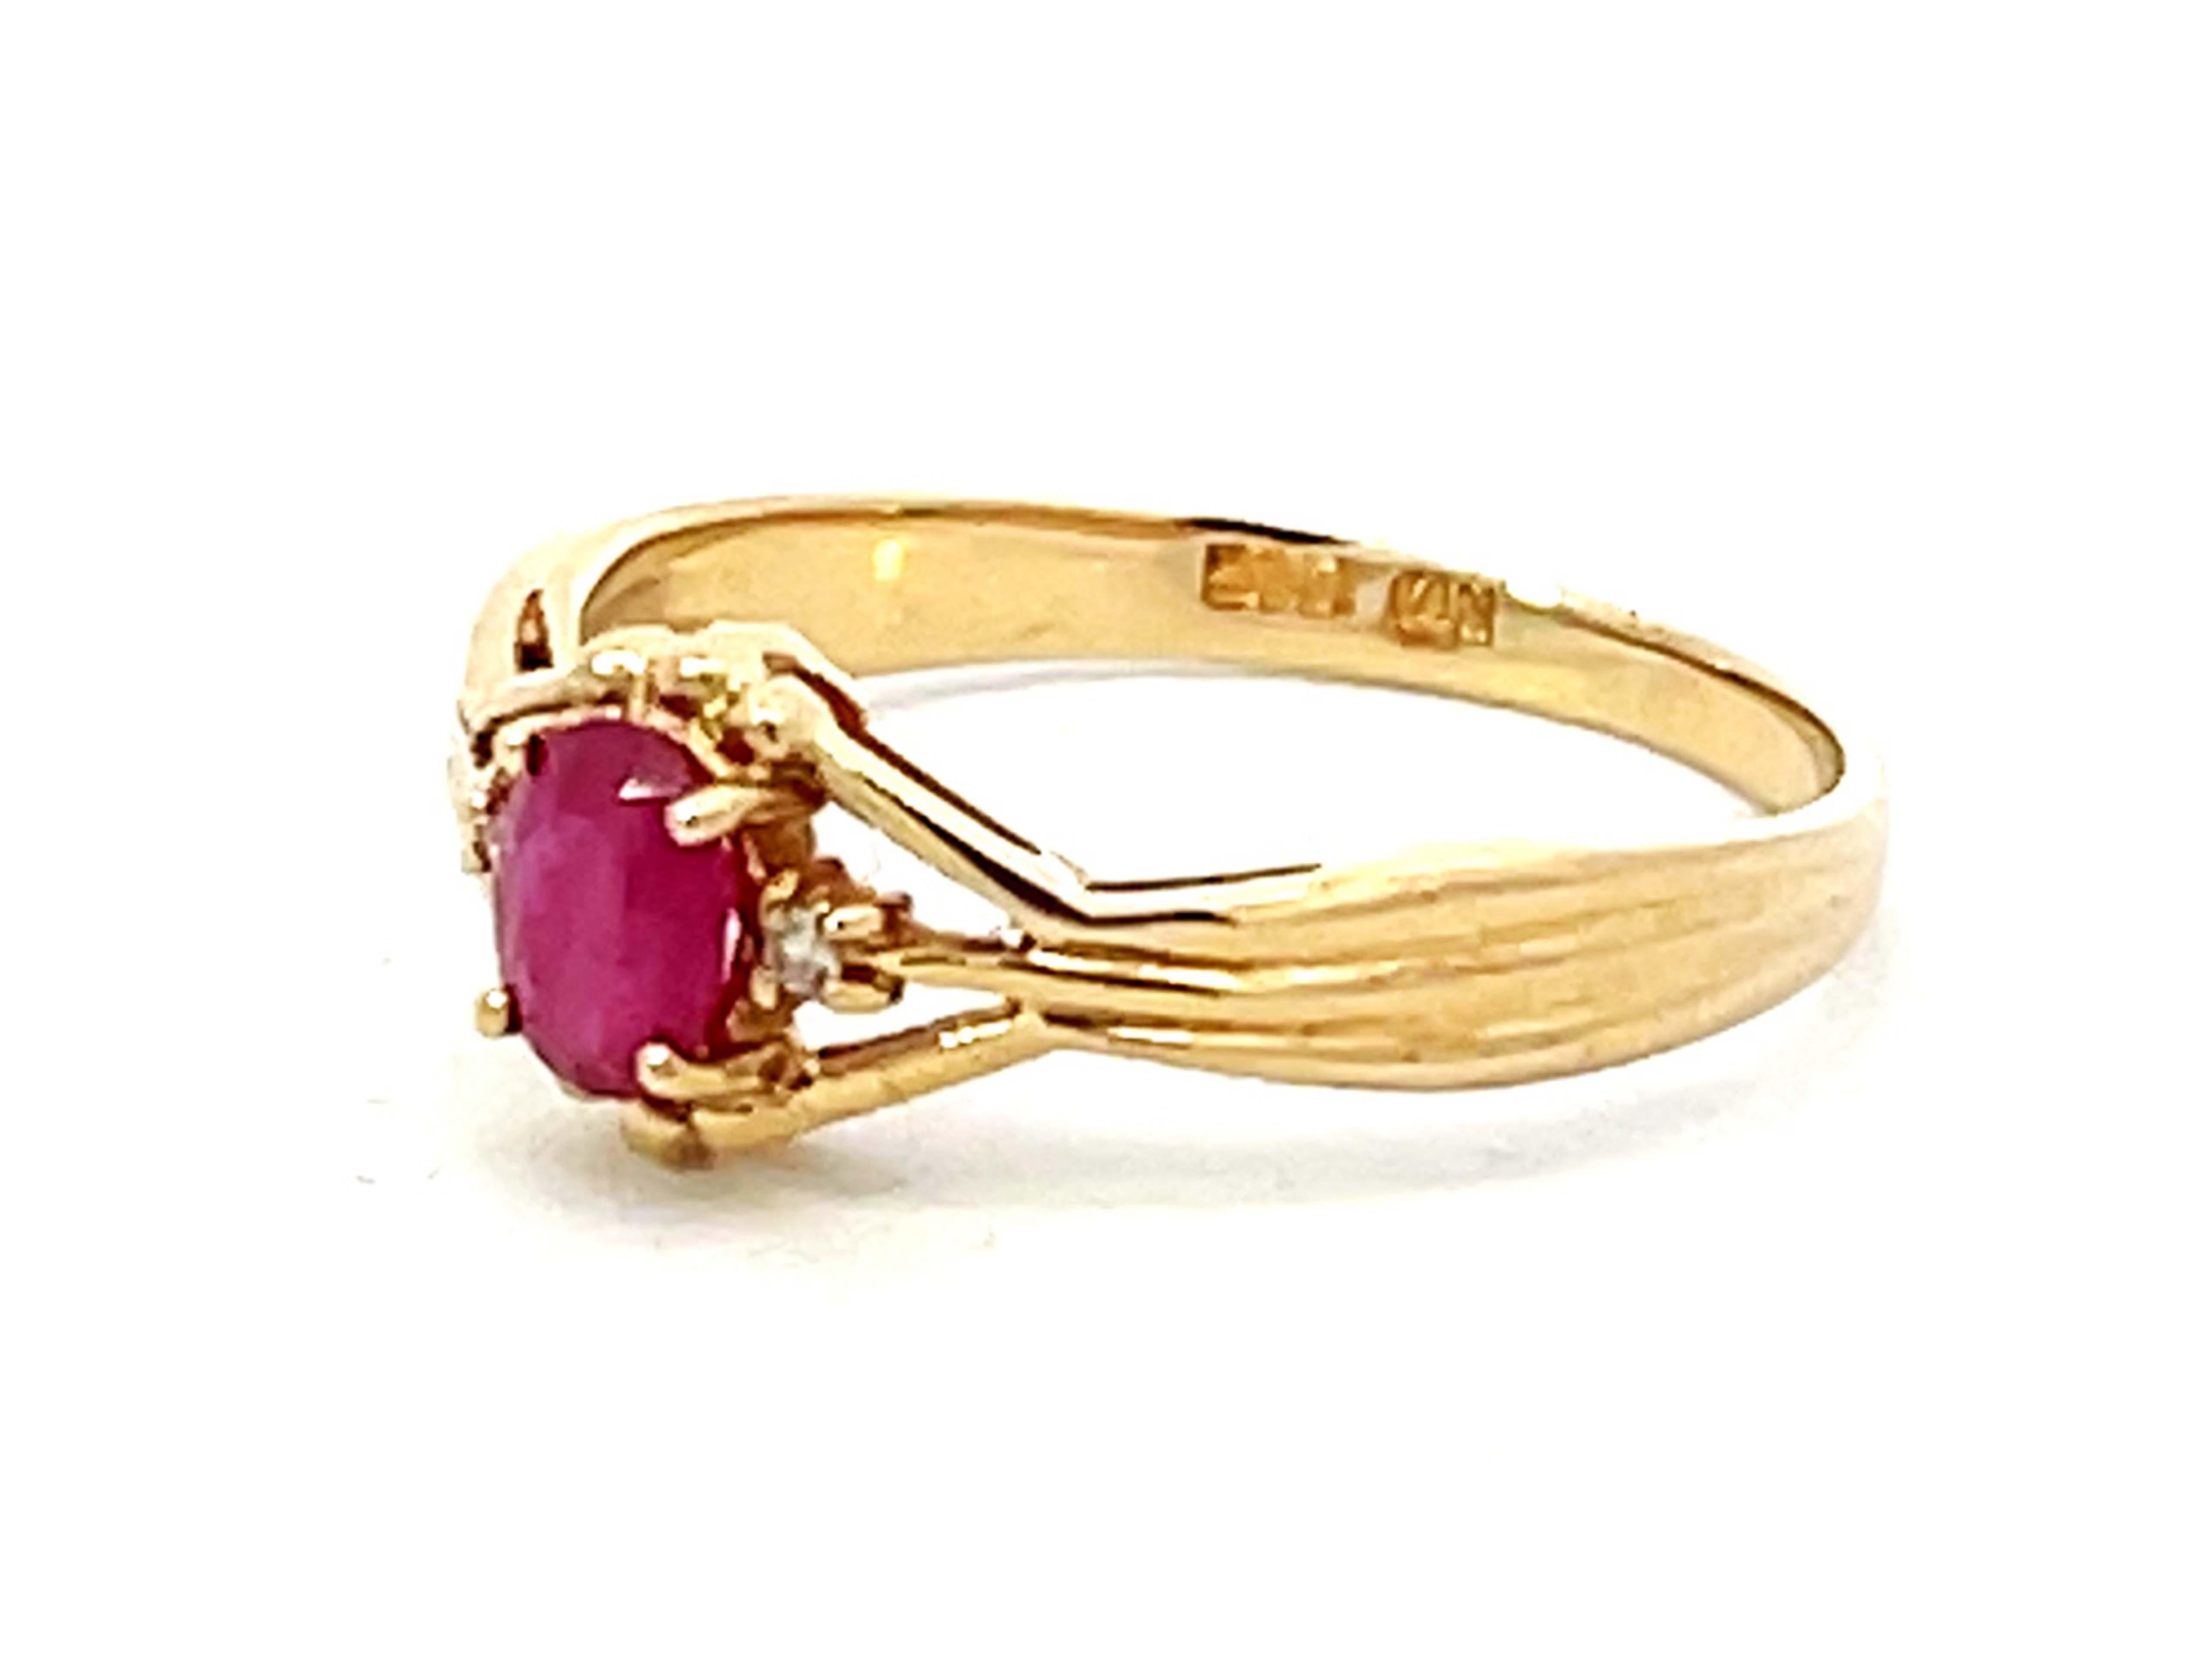 Brilliant Cut Oval Red Ruby Diamond Ring in 14k Yellow Gold For Sale